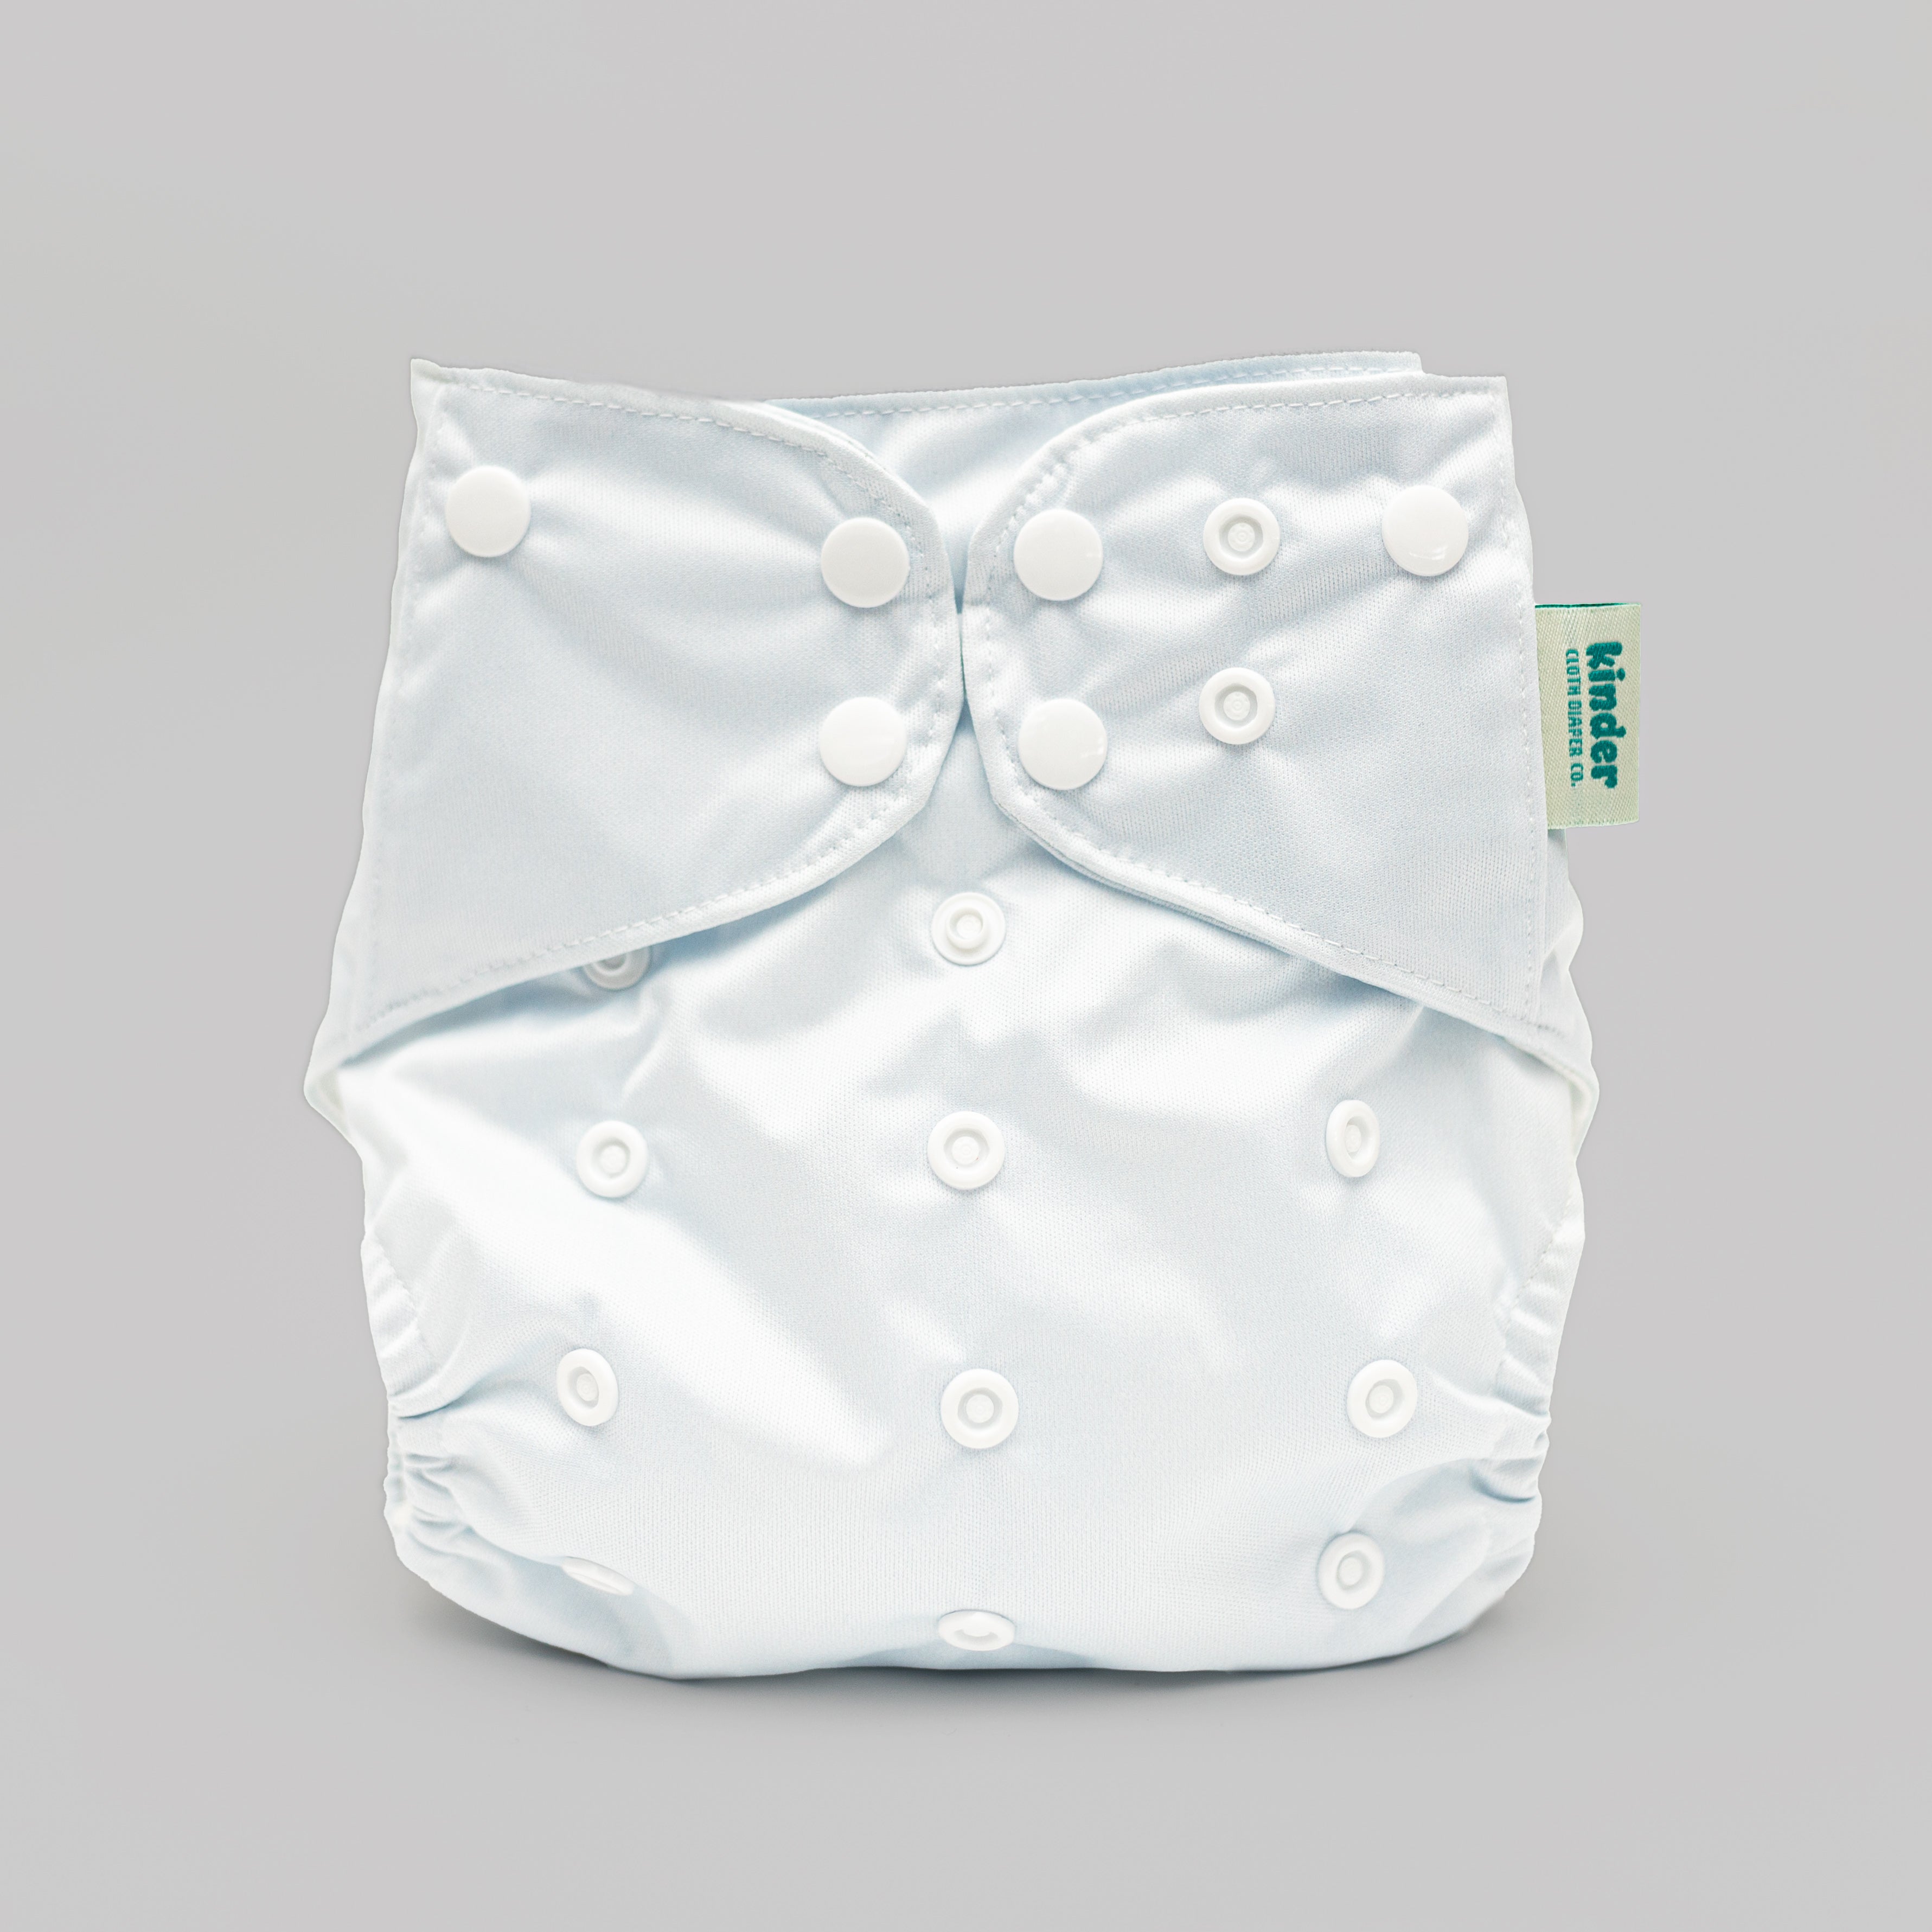 Bold Bright Reusable Modern Cloth Pocket Diaper Fits from Birth to Potty Training Toddler 60lbs 7lbs AWJ Tummy Panel White Neutral